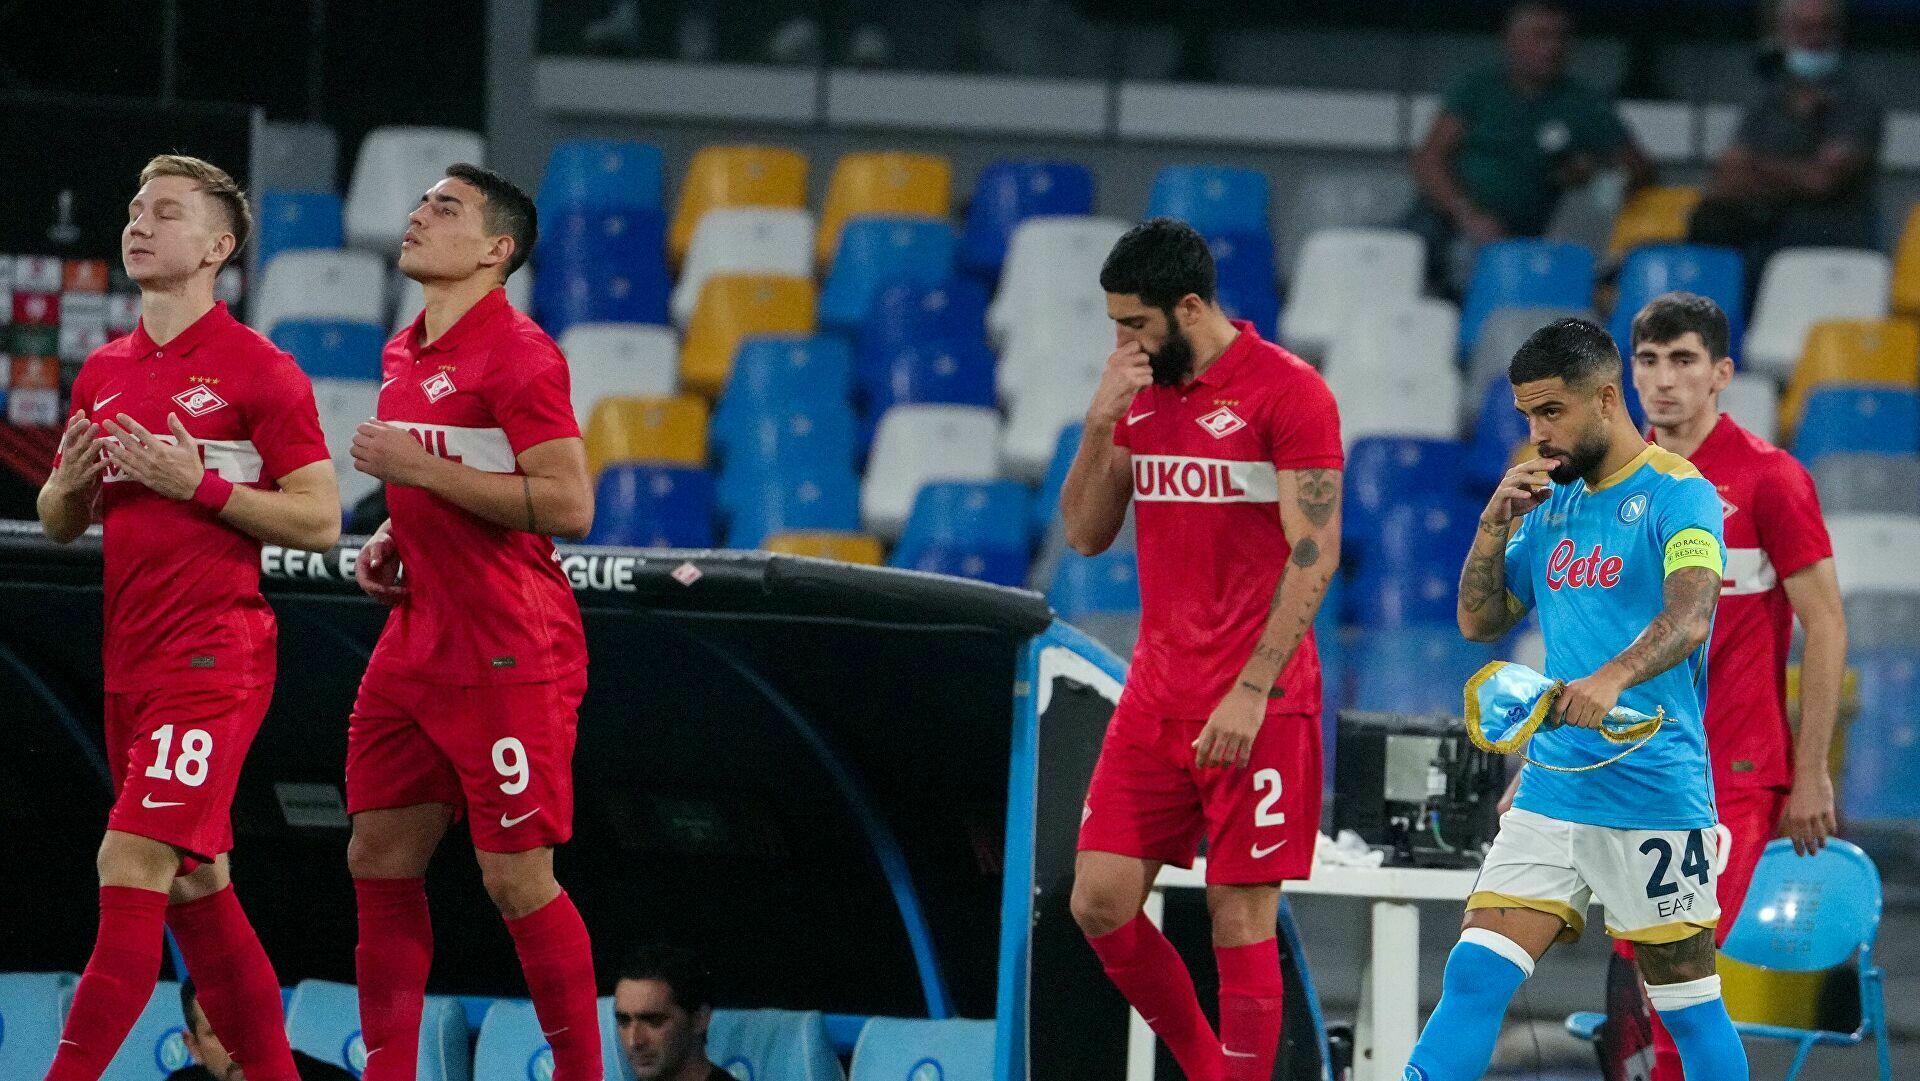 Spartak defeated Napoli, conceding a goal in 12 seconds